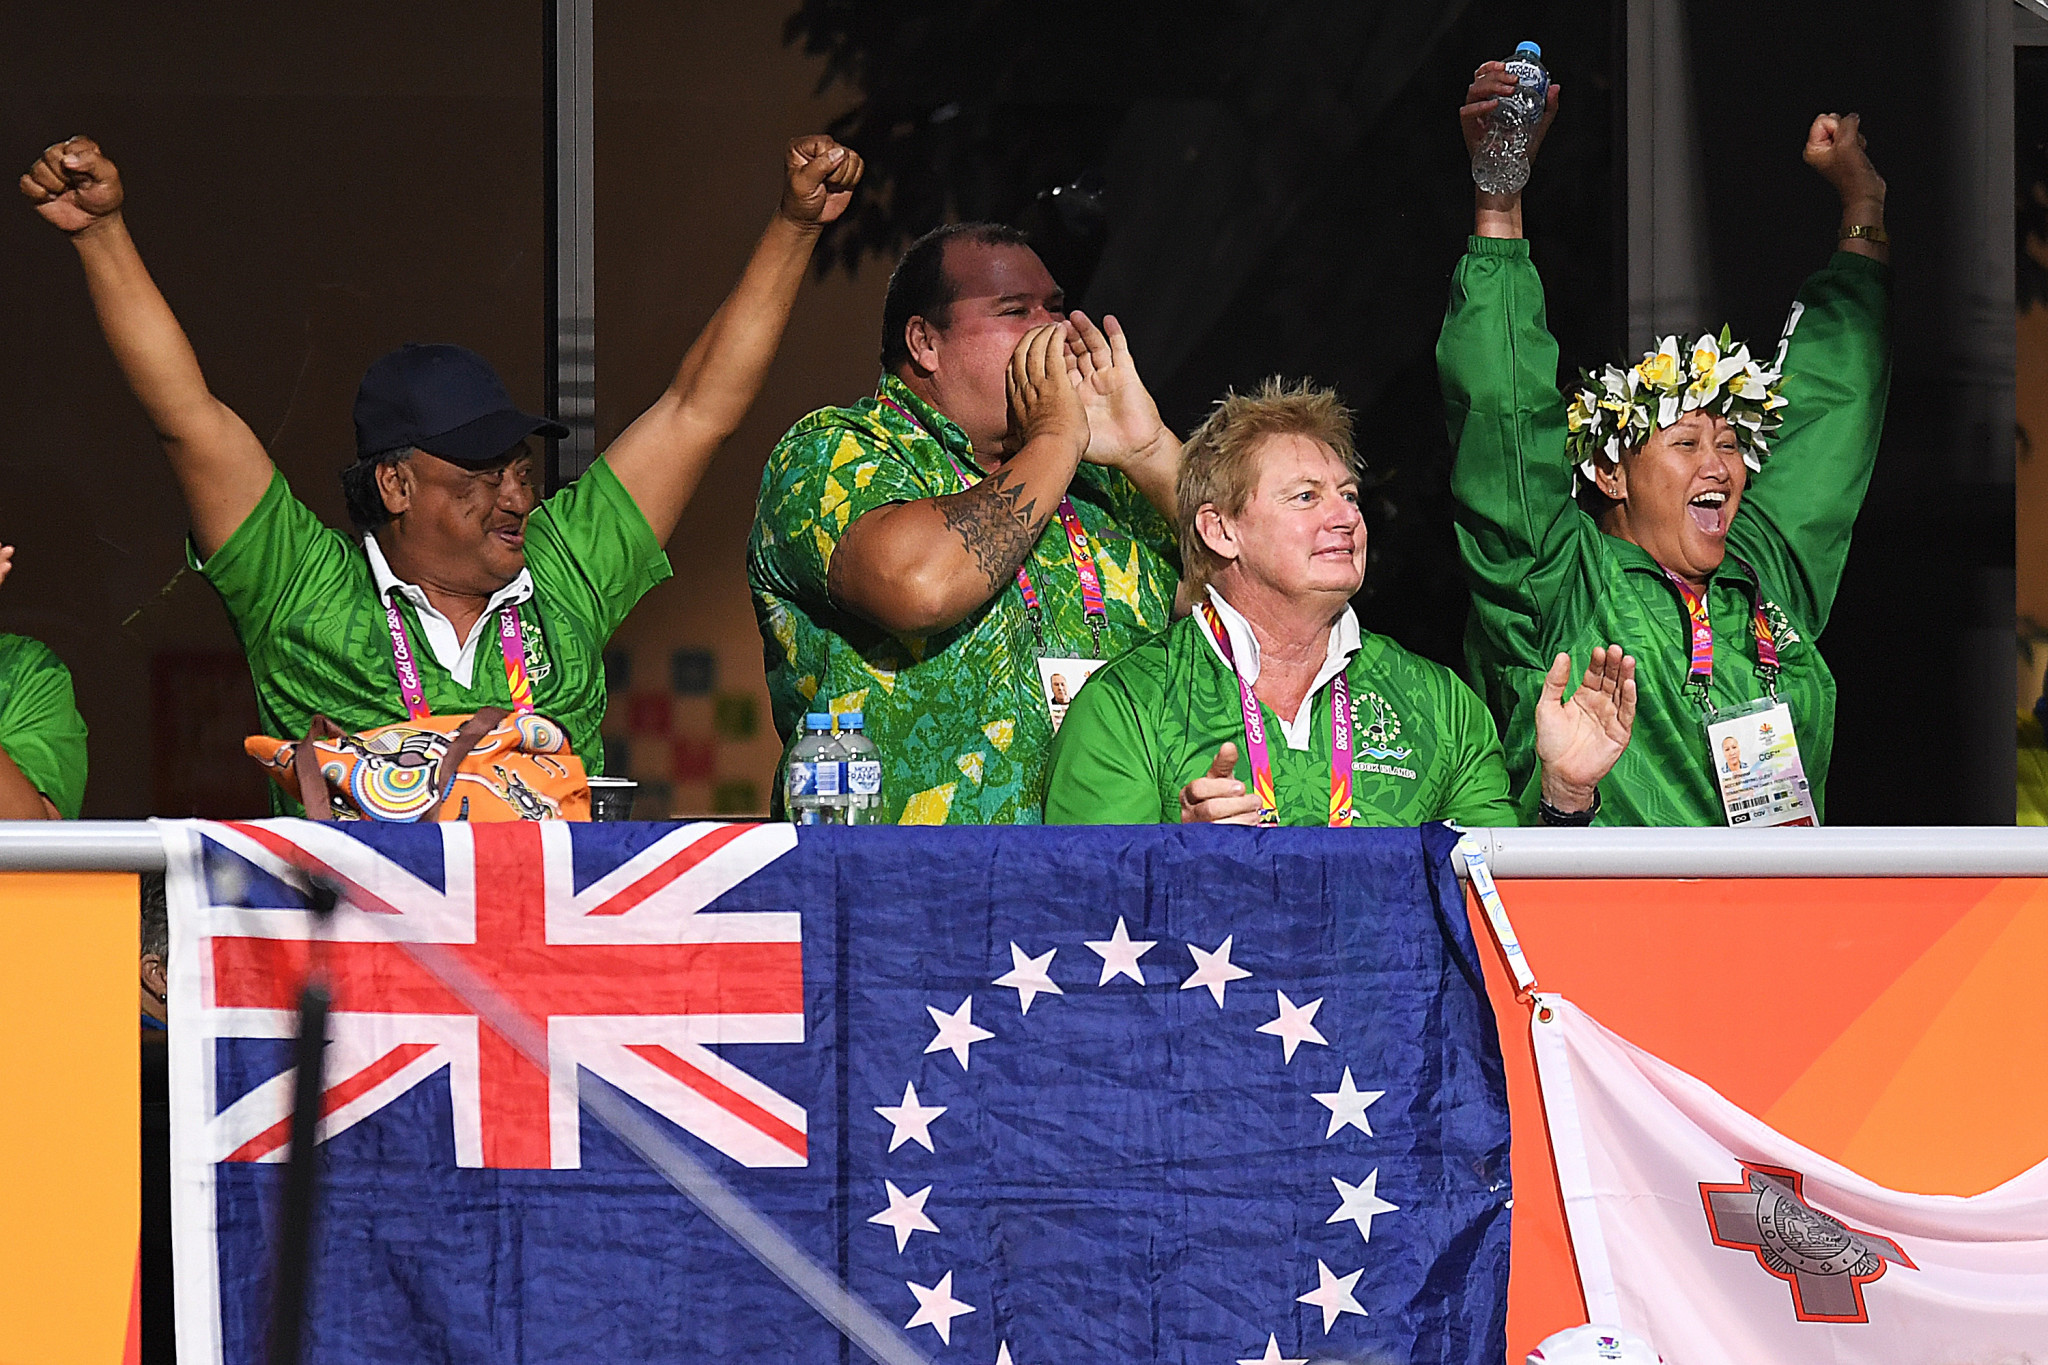 Members of the Cook Islands delegation celebrate at the Gold Coast 2018 lawn bowls venue ©Getty Images